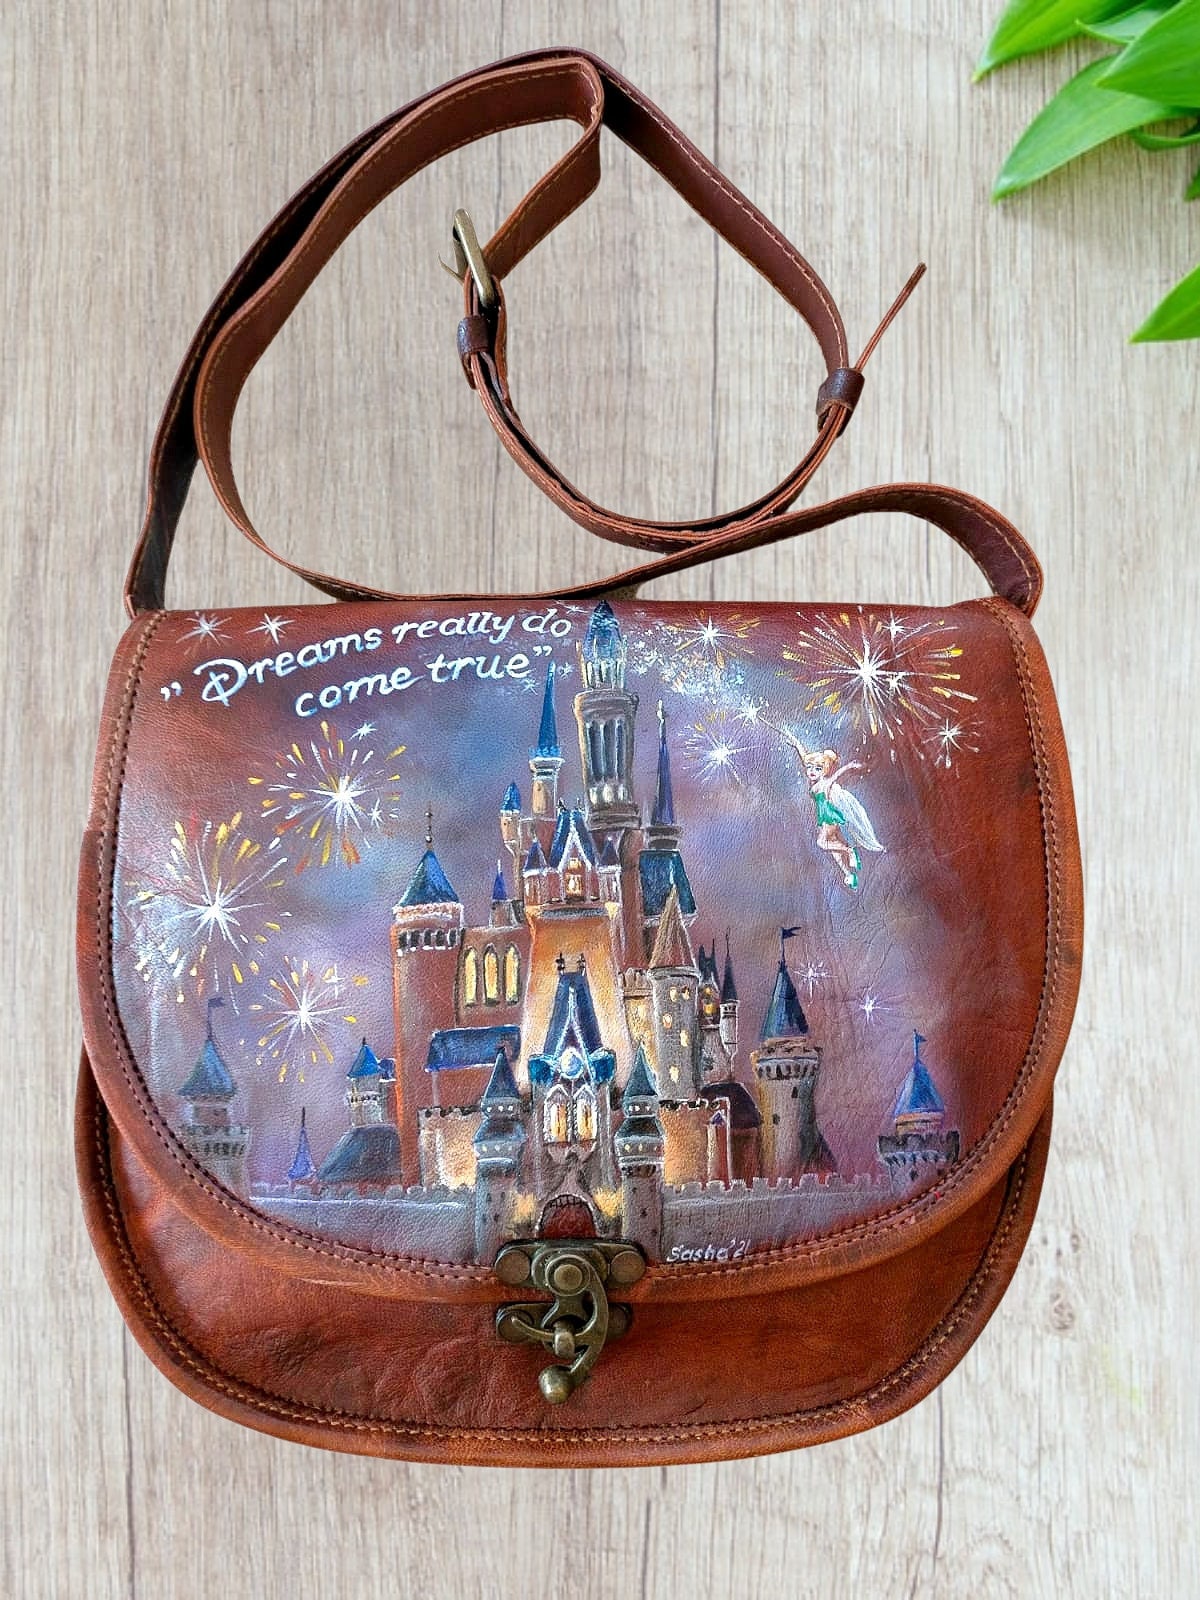 Hand Painted Leather Crossbody Bag Bag With Disney Castle 